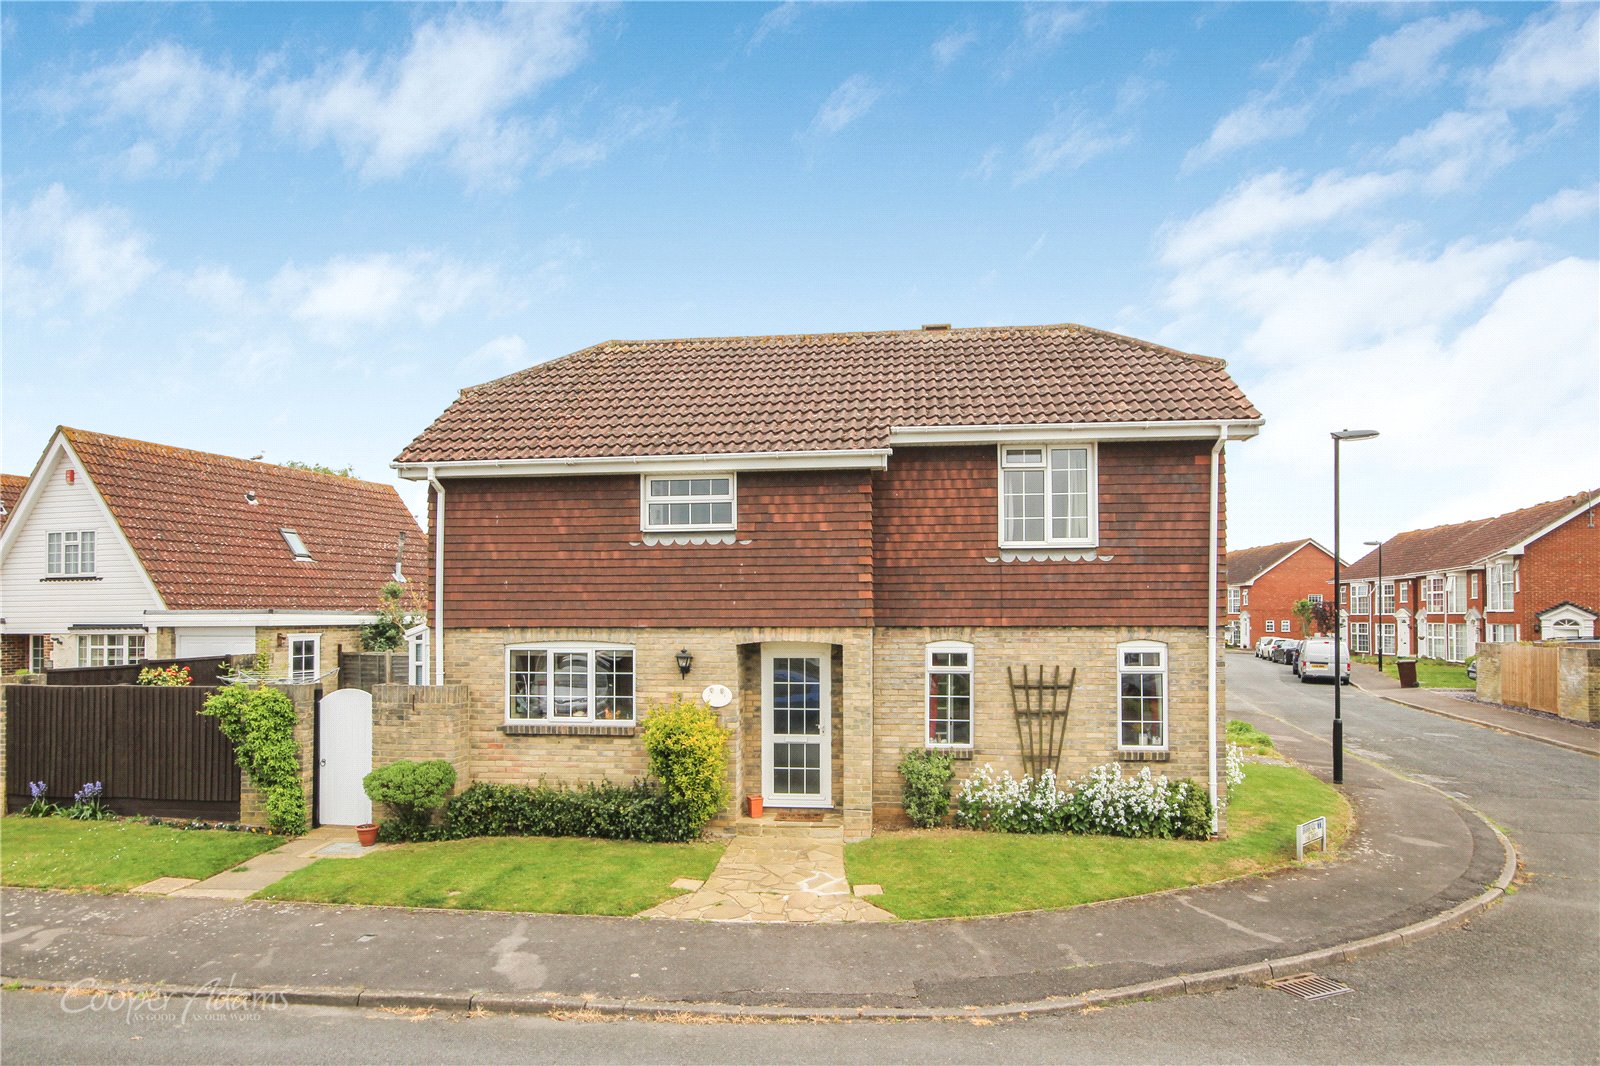 3 bed house for sale in Briar Close, Angmering, BN16